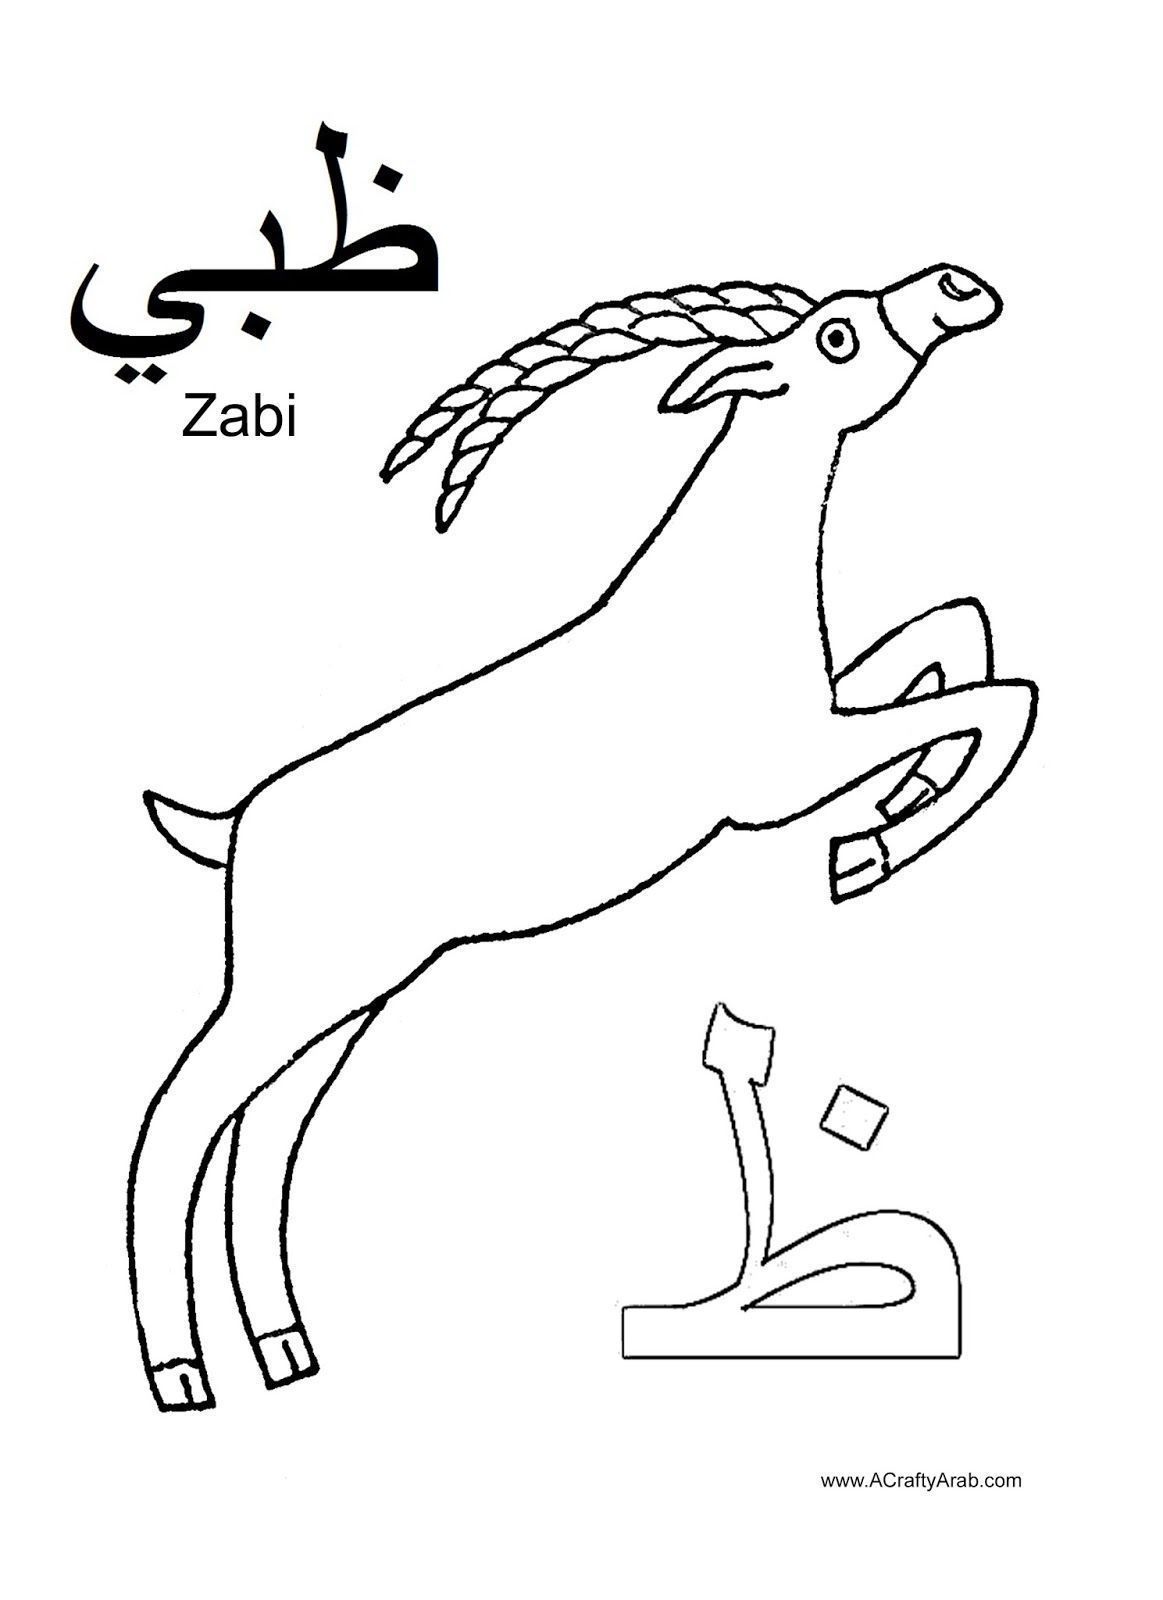 Arabic Coloring Pages at GetColorings.com | Free printable colorings